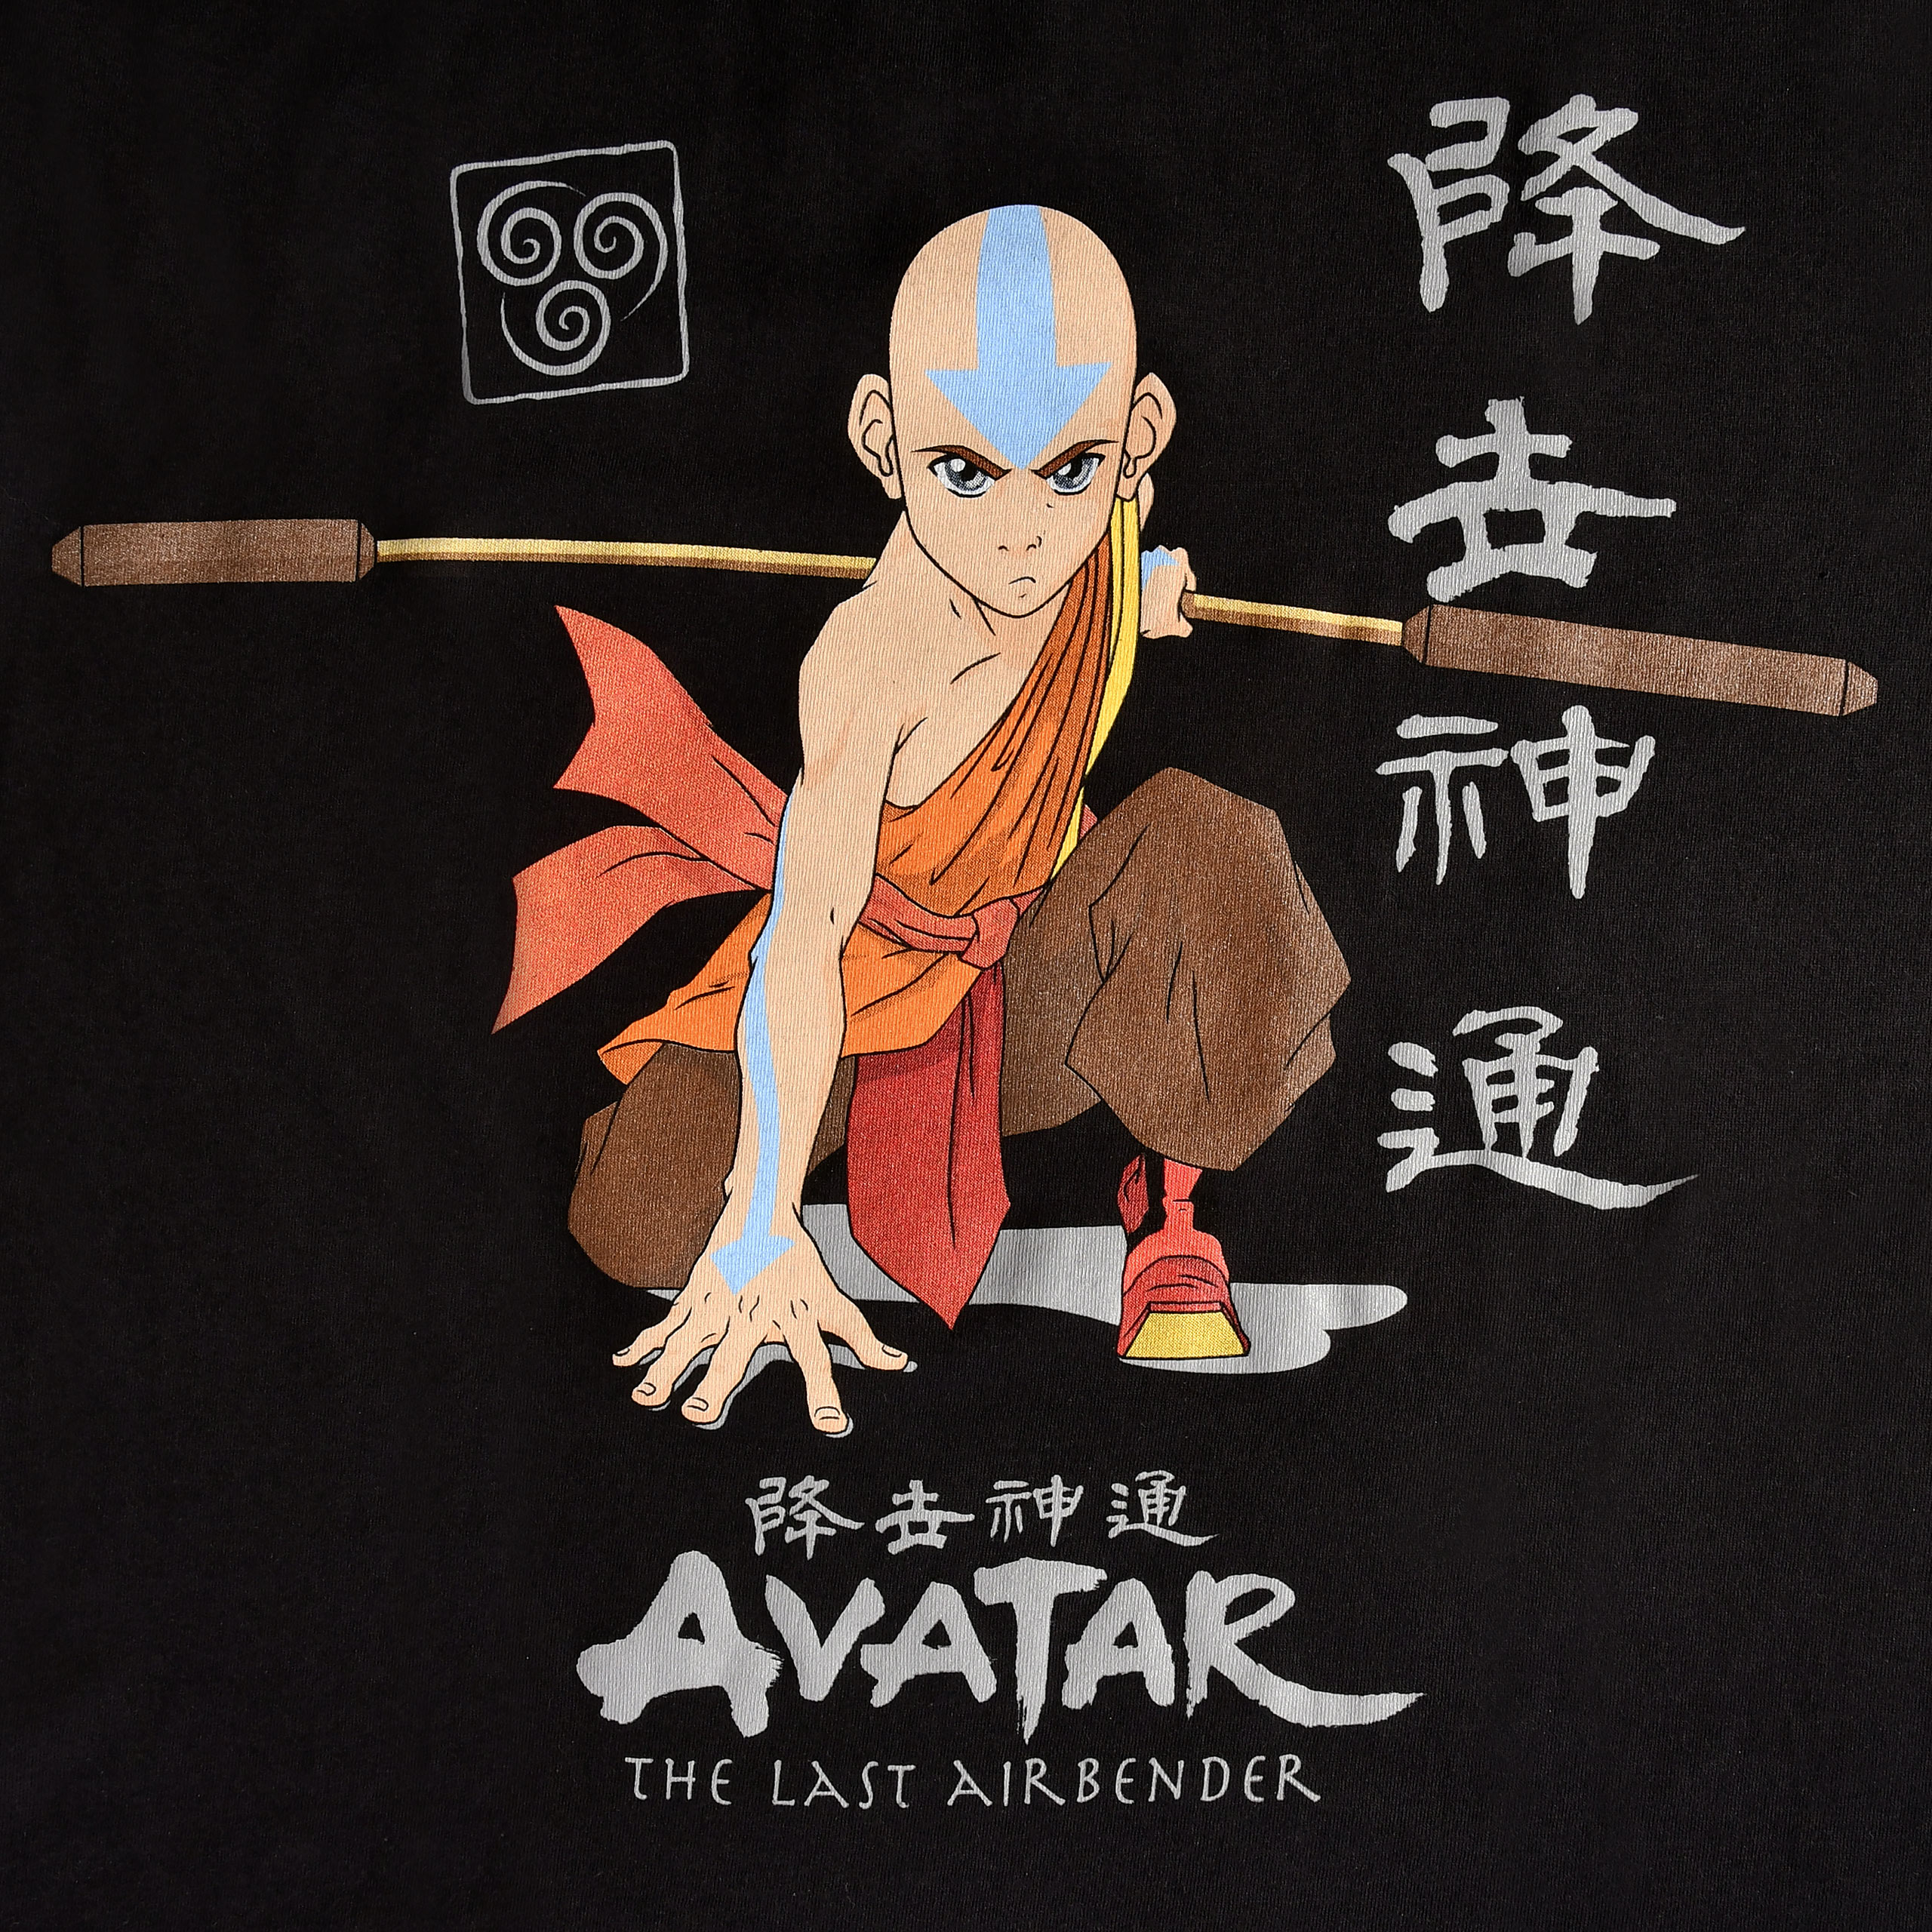 Avatar The Last Airbender - Aang Ready For Battle T-Shirt Black